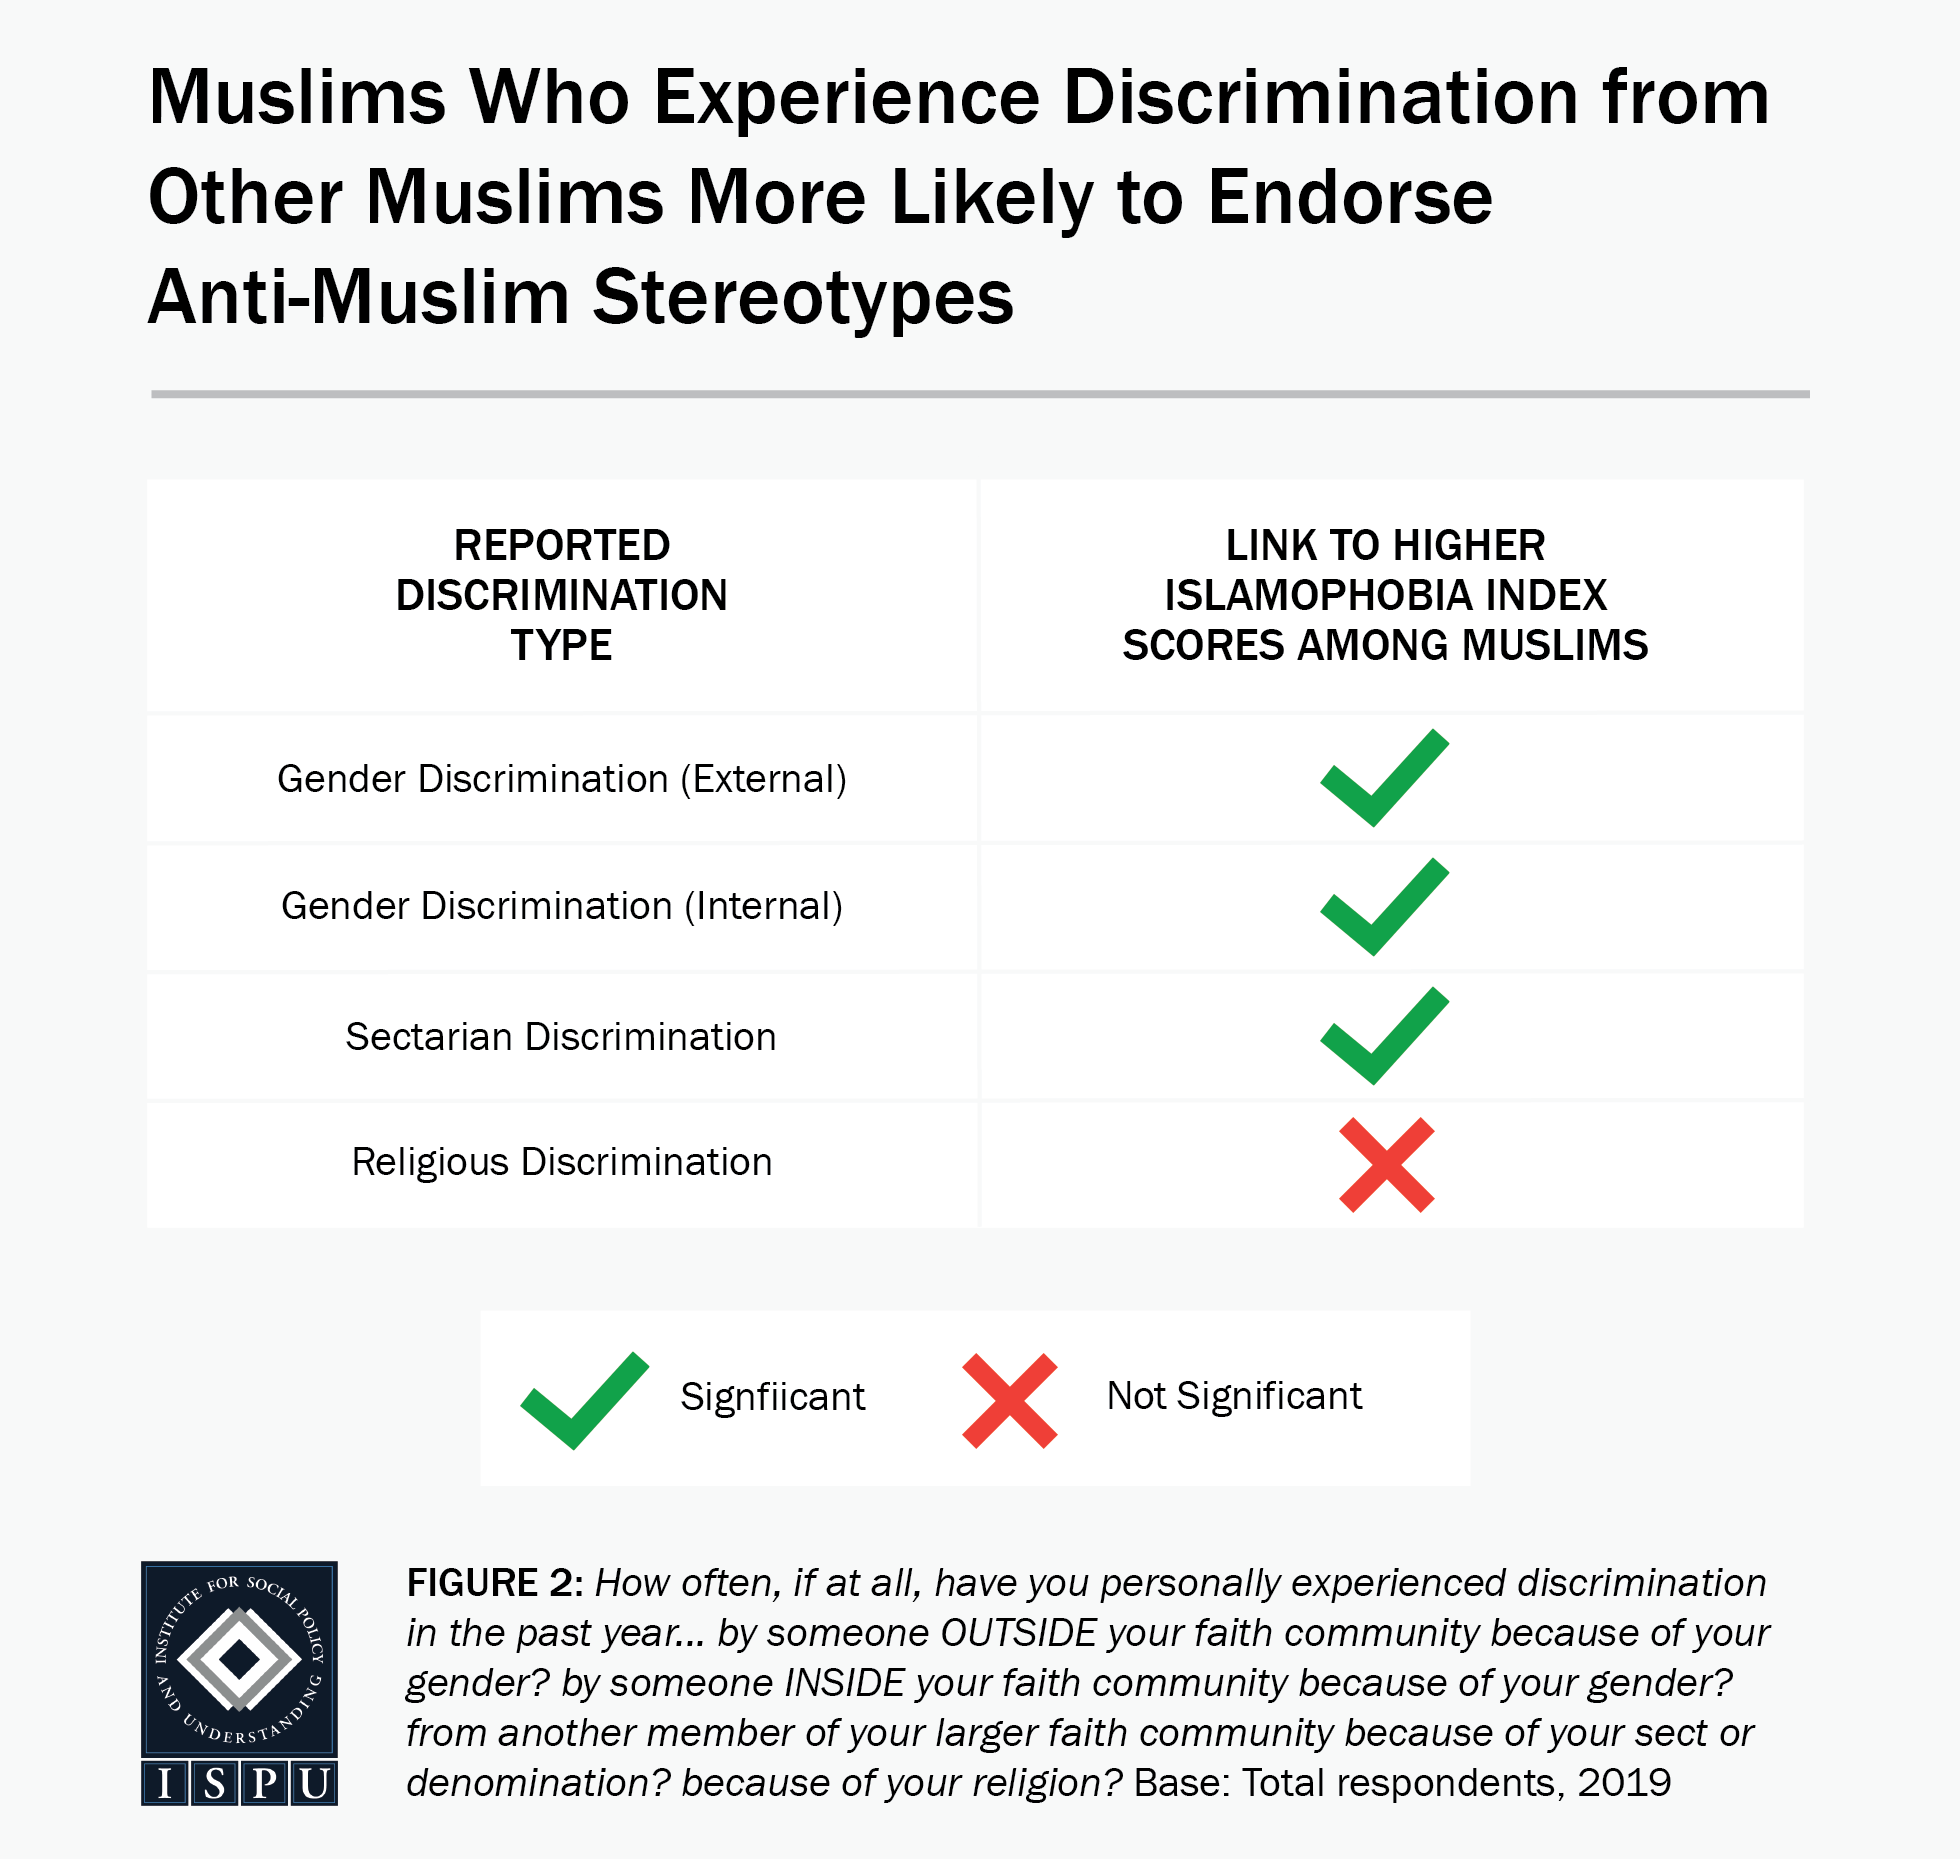 Figure 2: A table showing that Muslims who experience discrimination from other Muslims are more likely to endorse anti-Muslim stereotypes